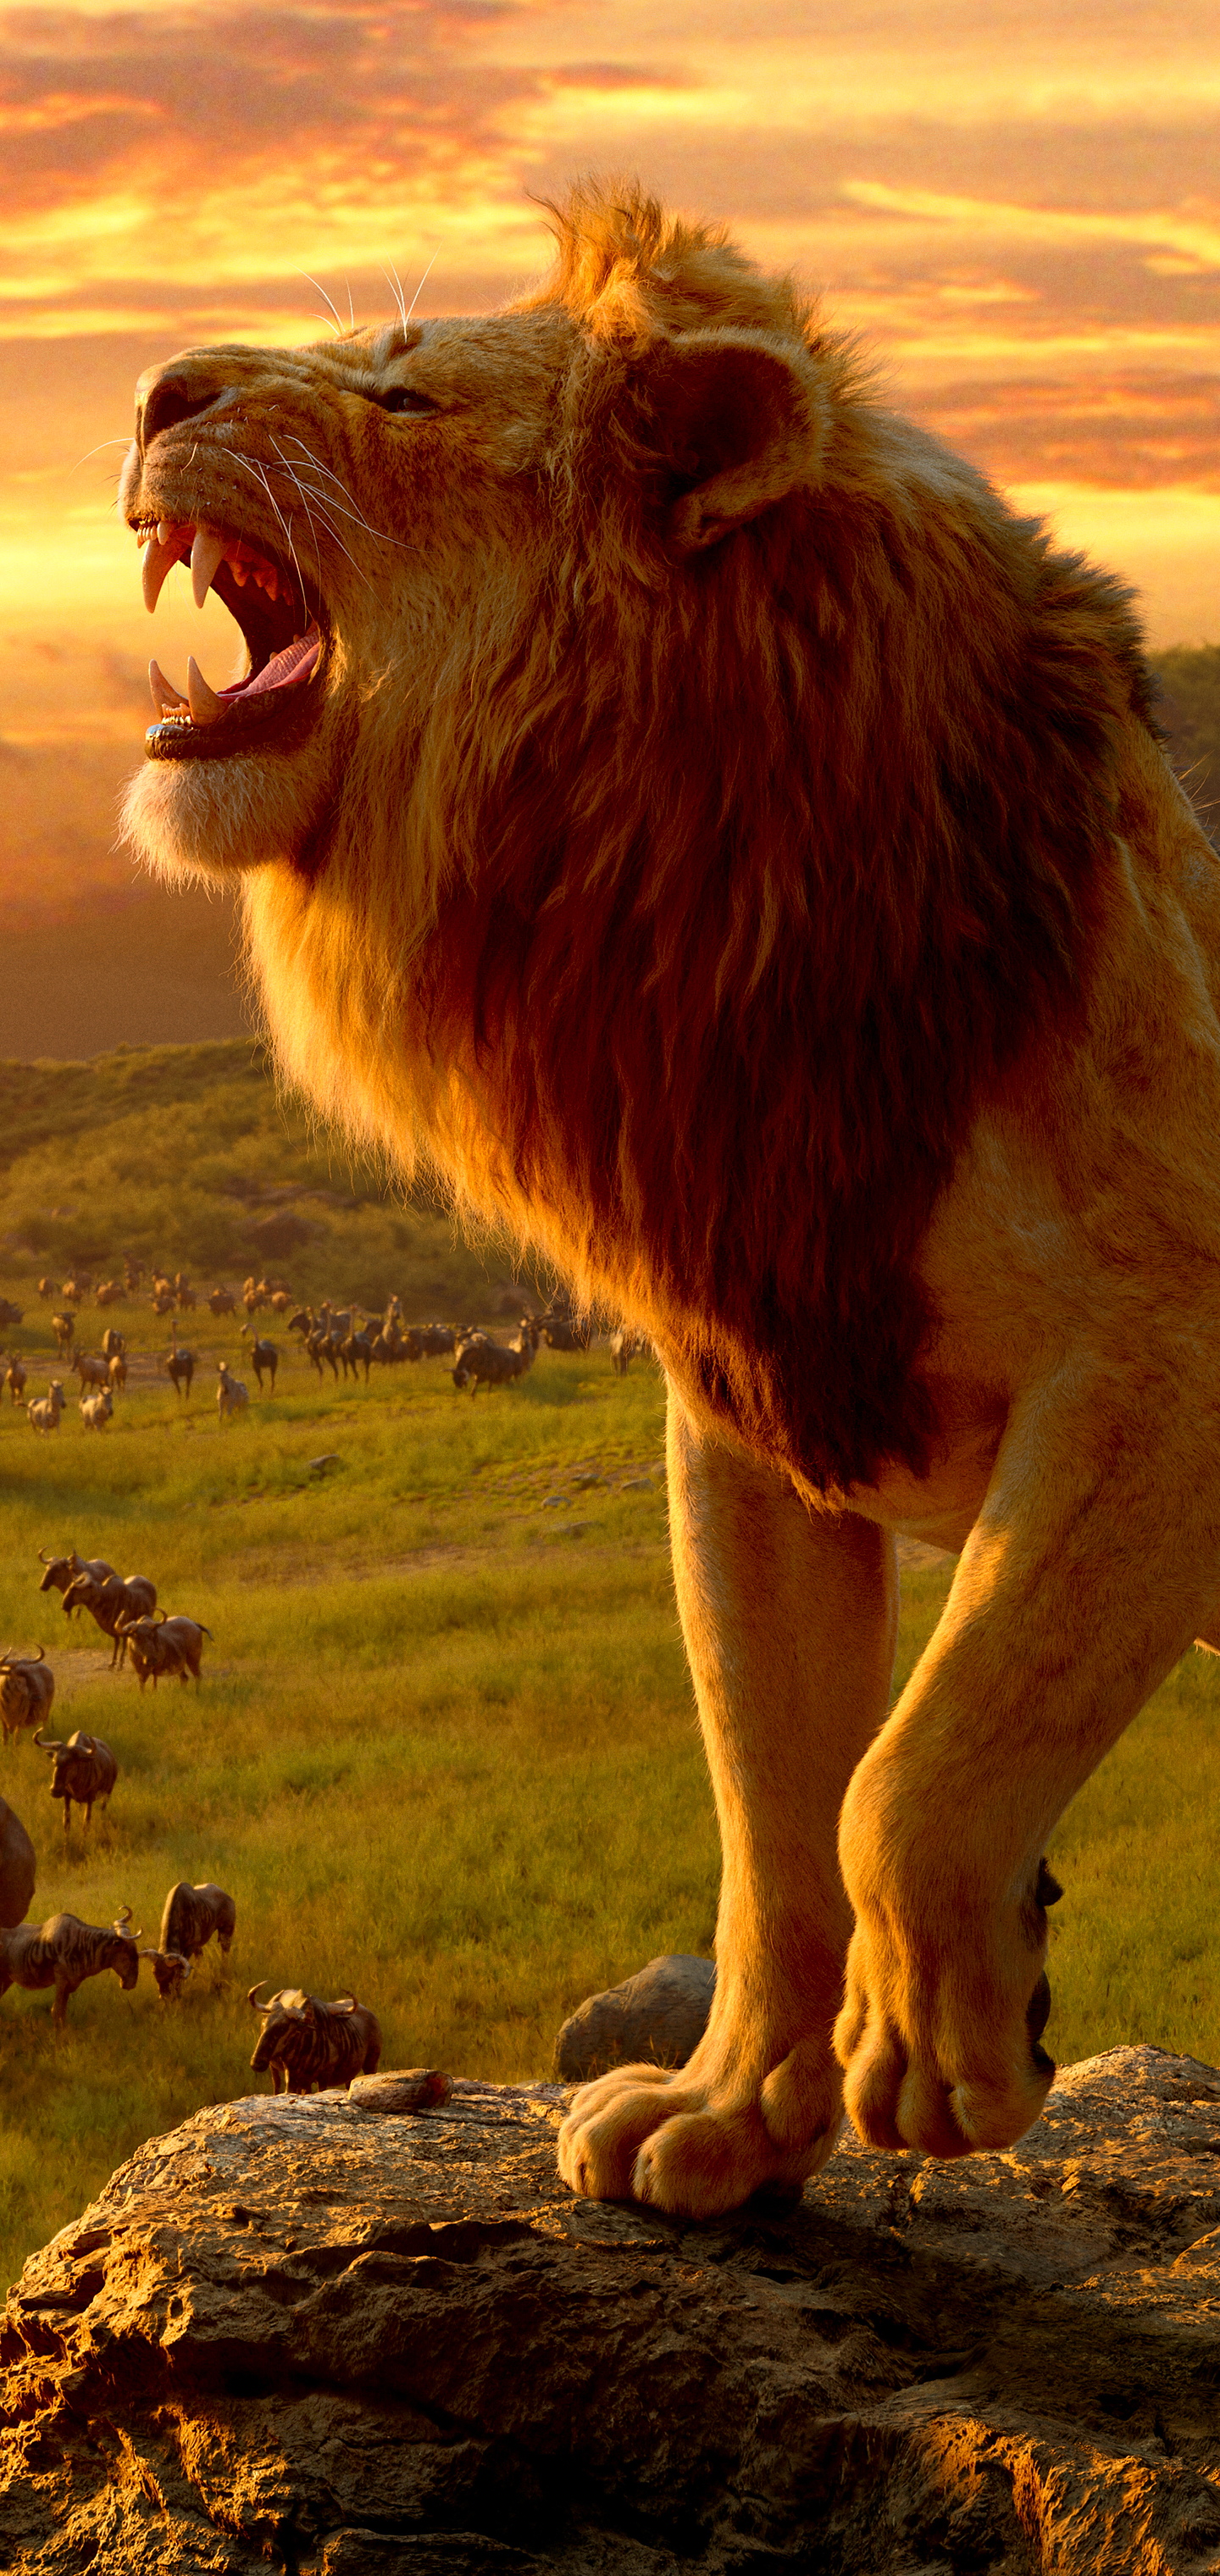 Hd Wallpaper Of Lion For Mobile